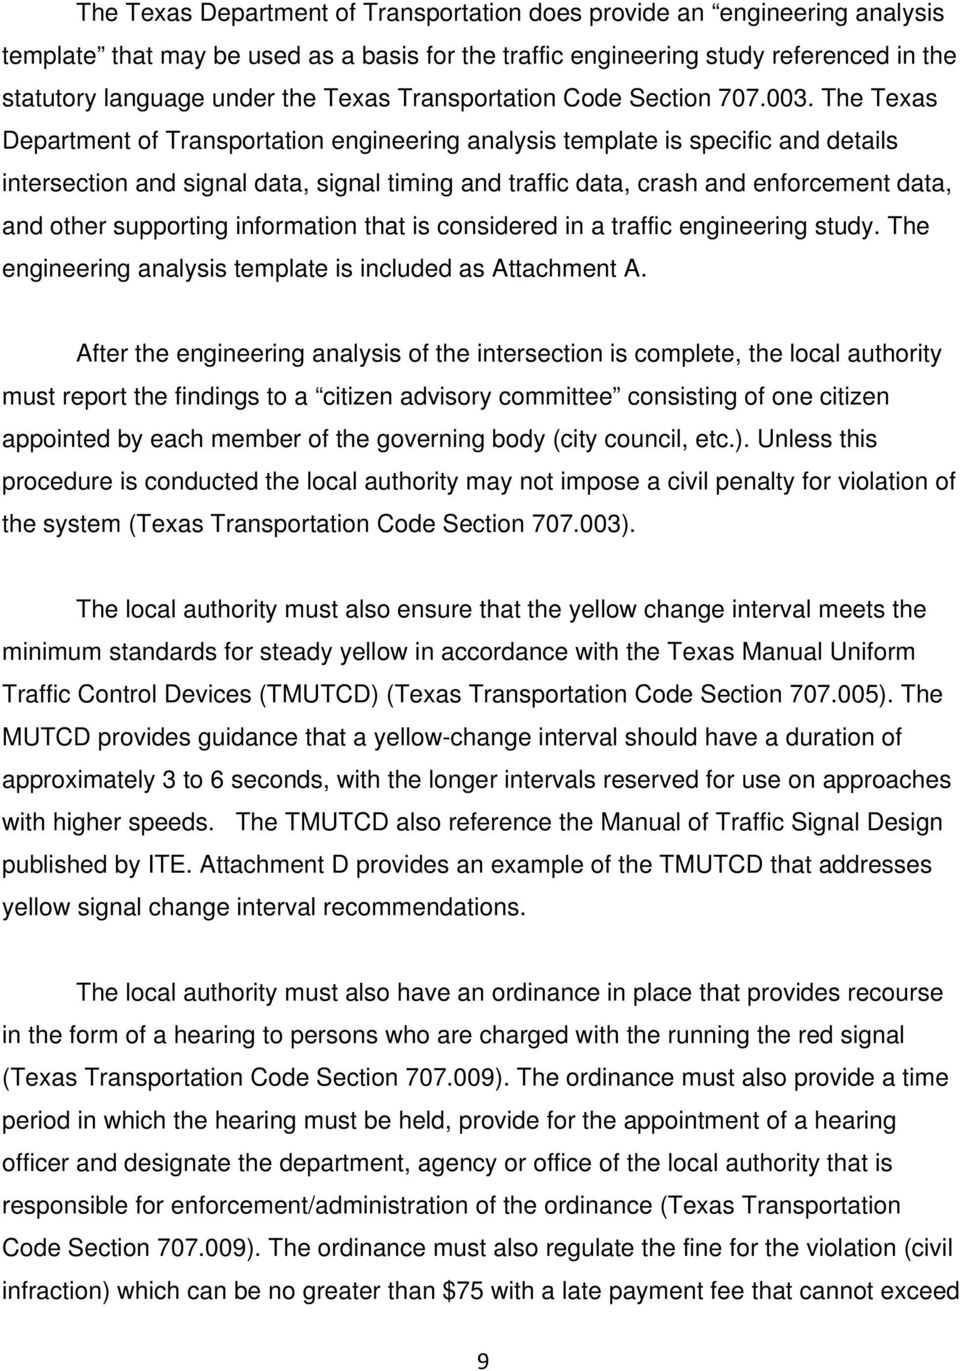 The Texas Department of Transportation engineering analysis template is specific and details intersection and signal data, signal timing and traffic data, crash and enforcement data, and other